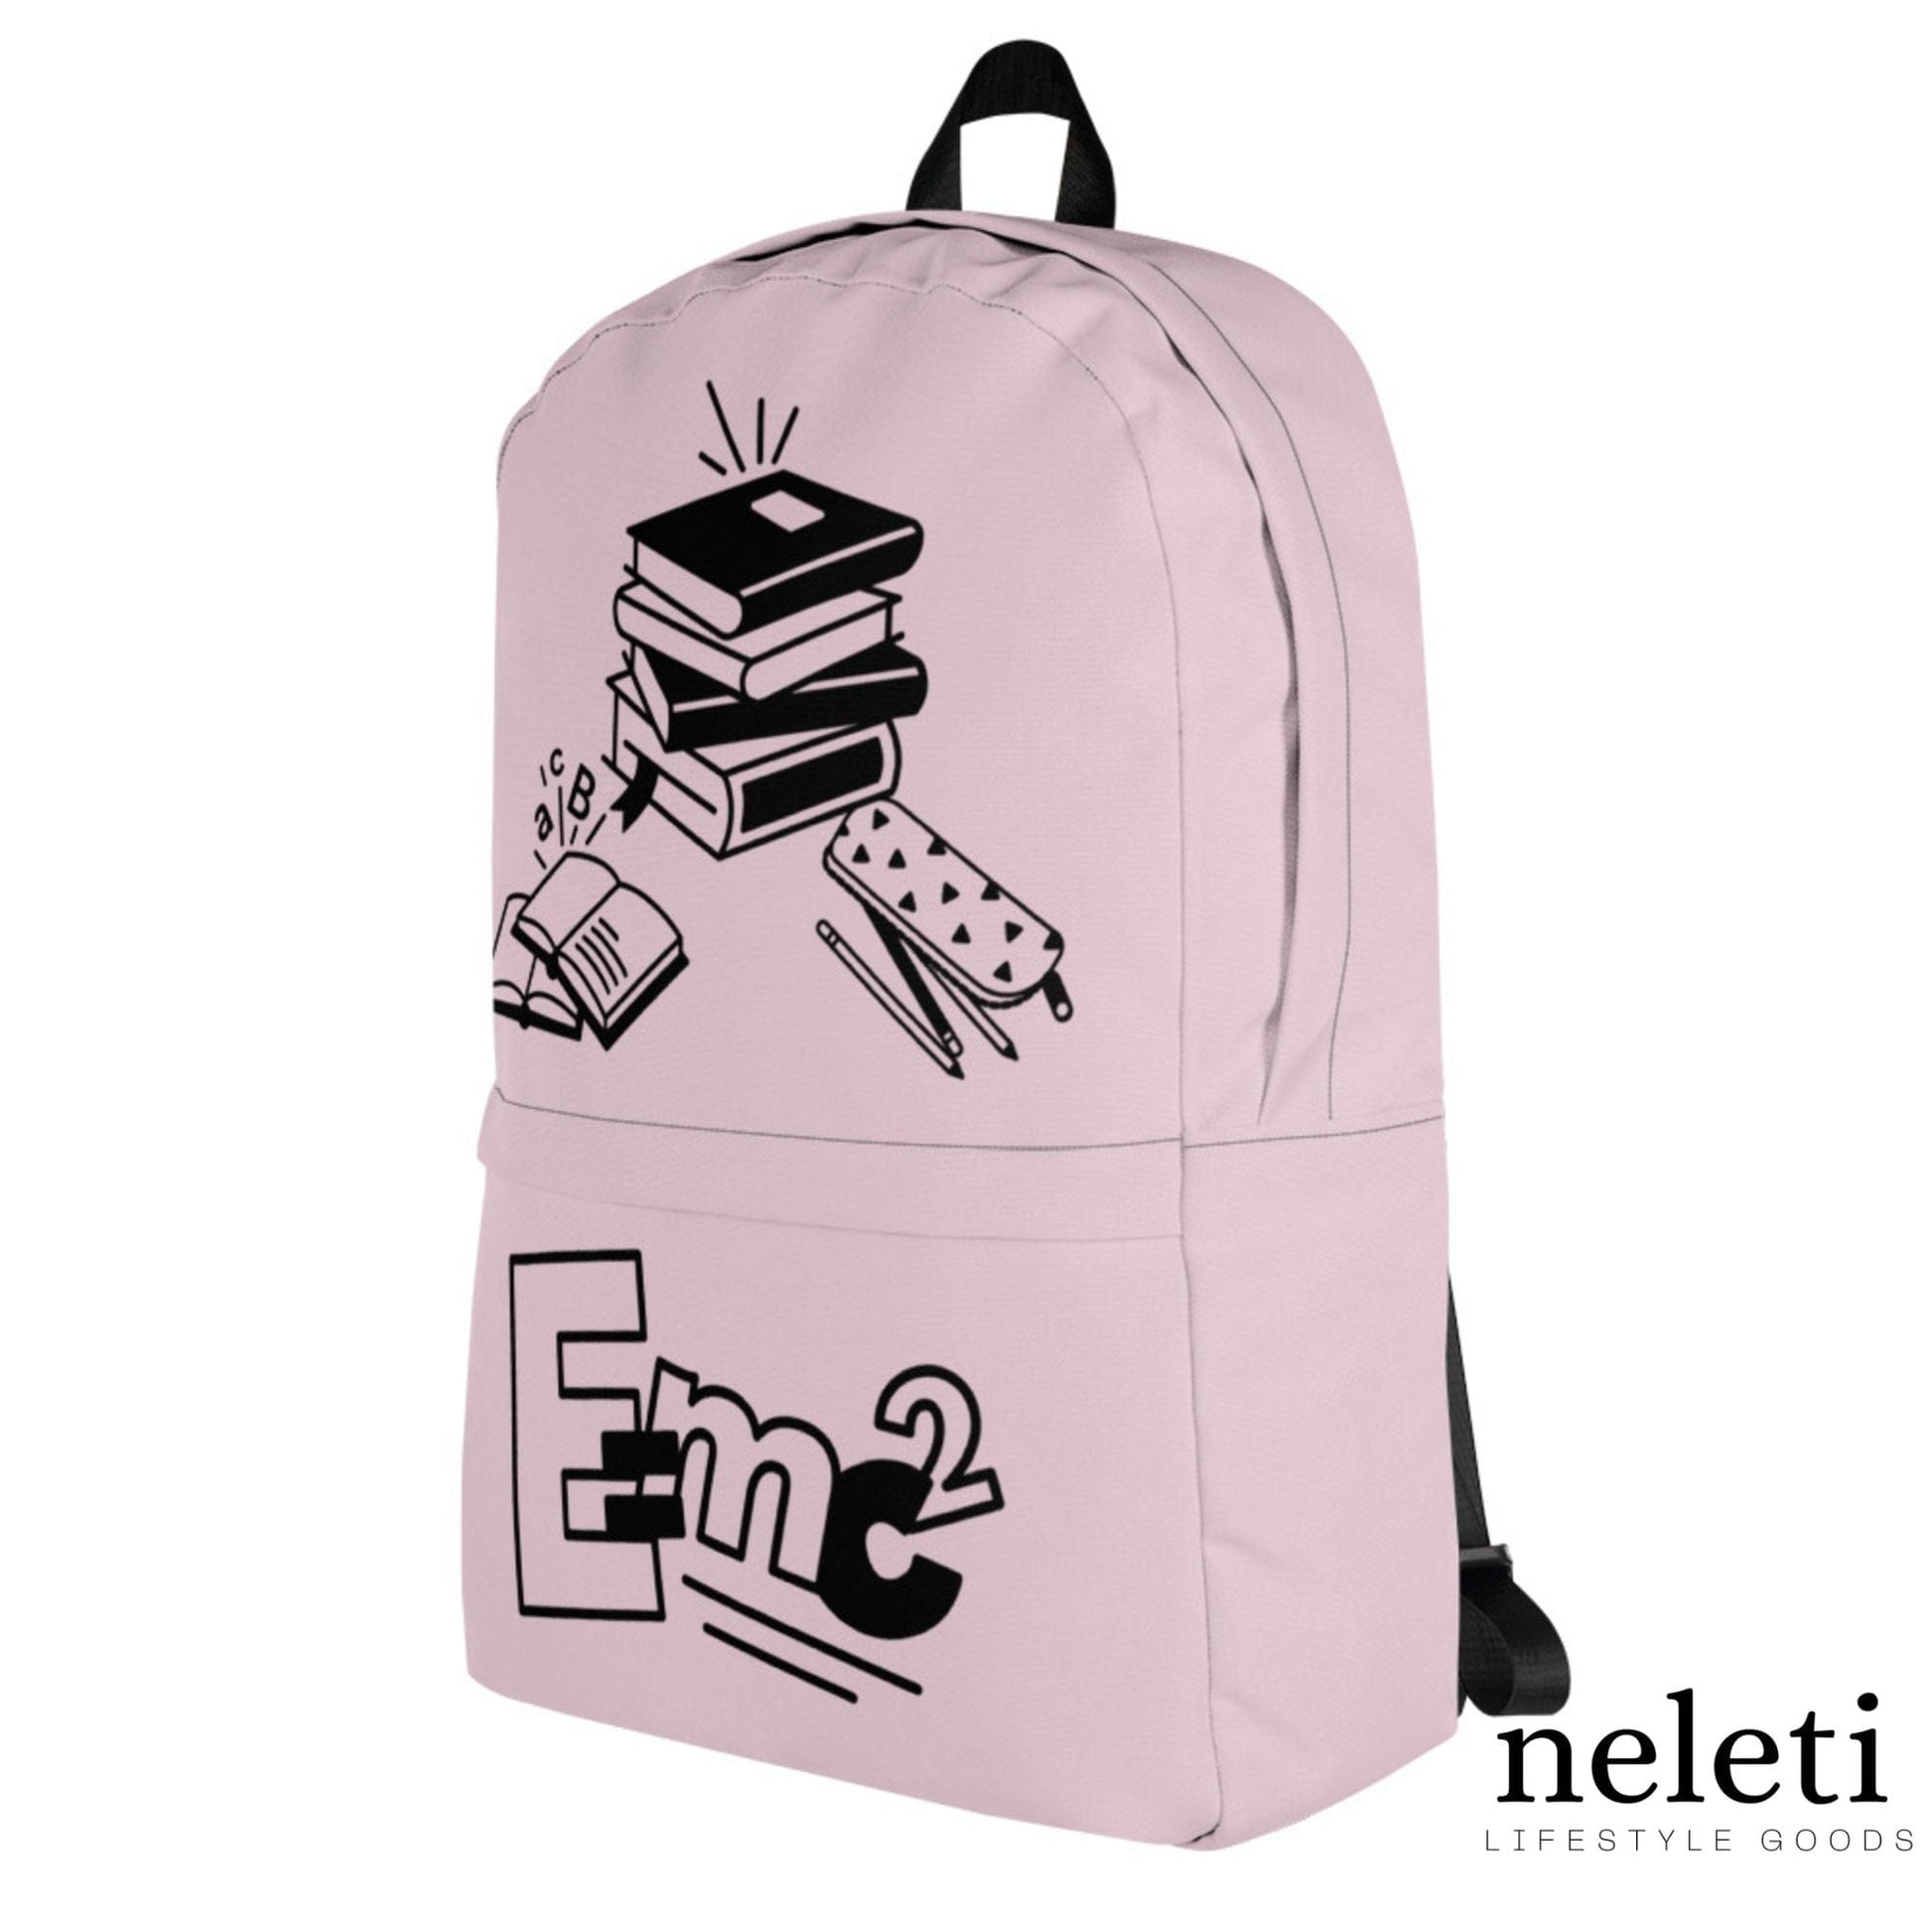 neleti.com-pink-lace-backpacks-for-students